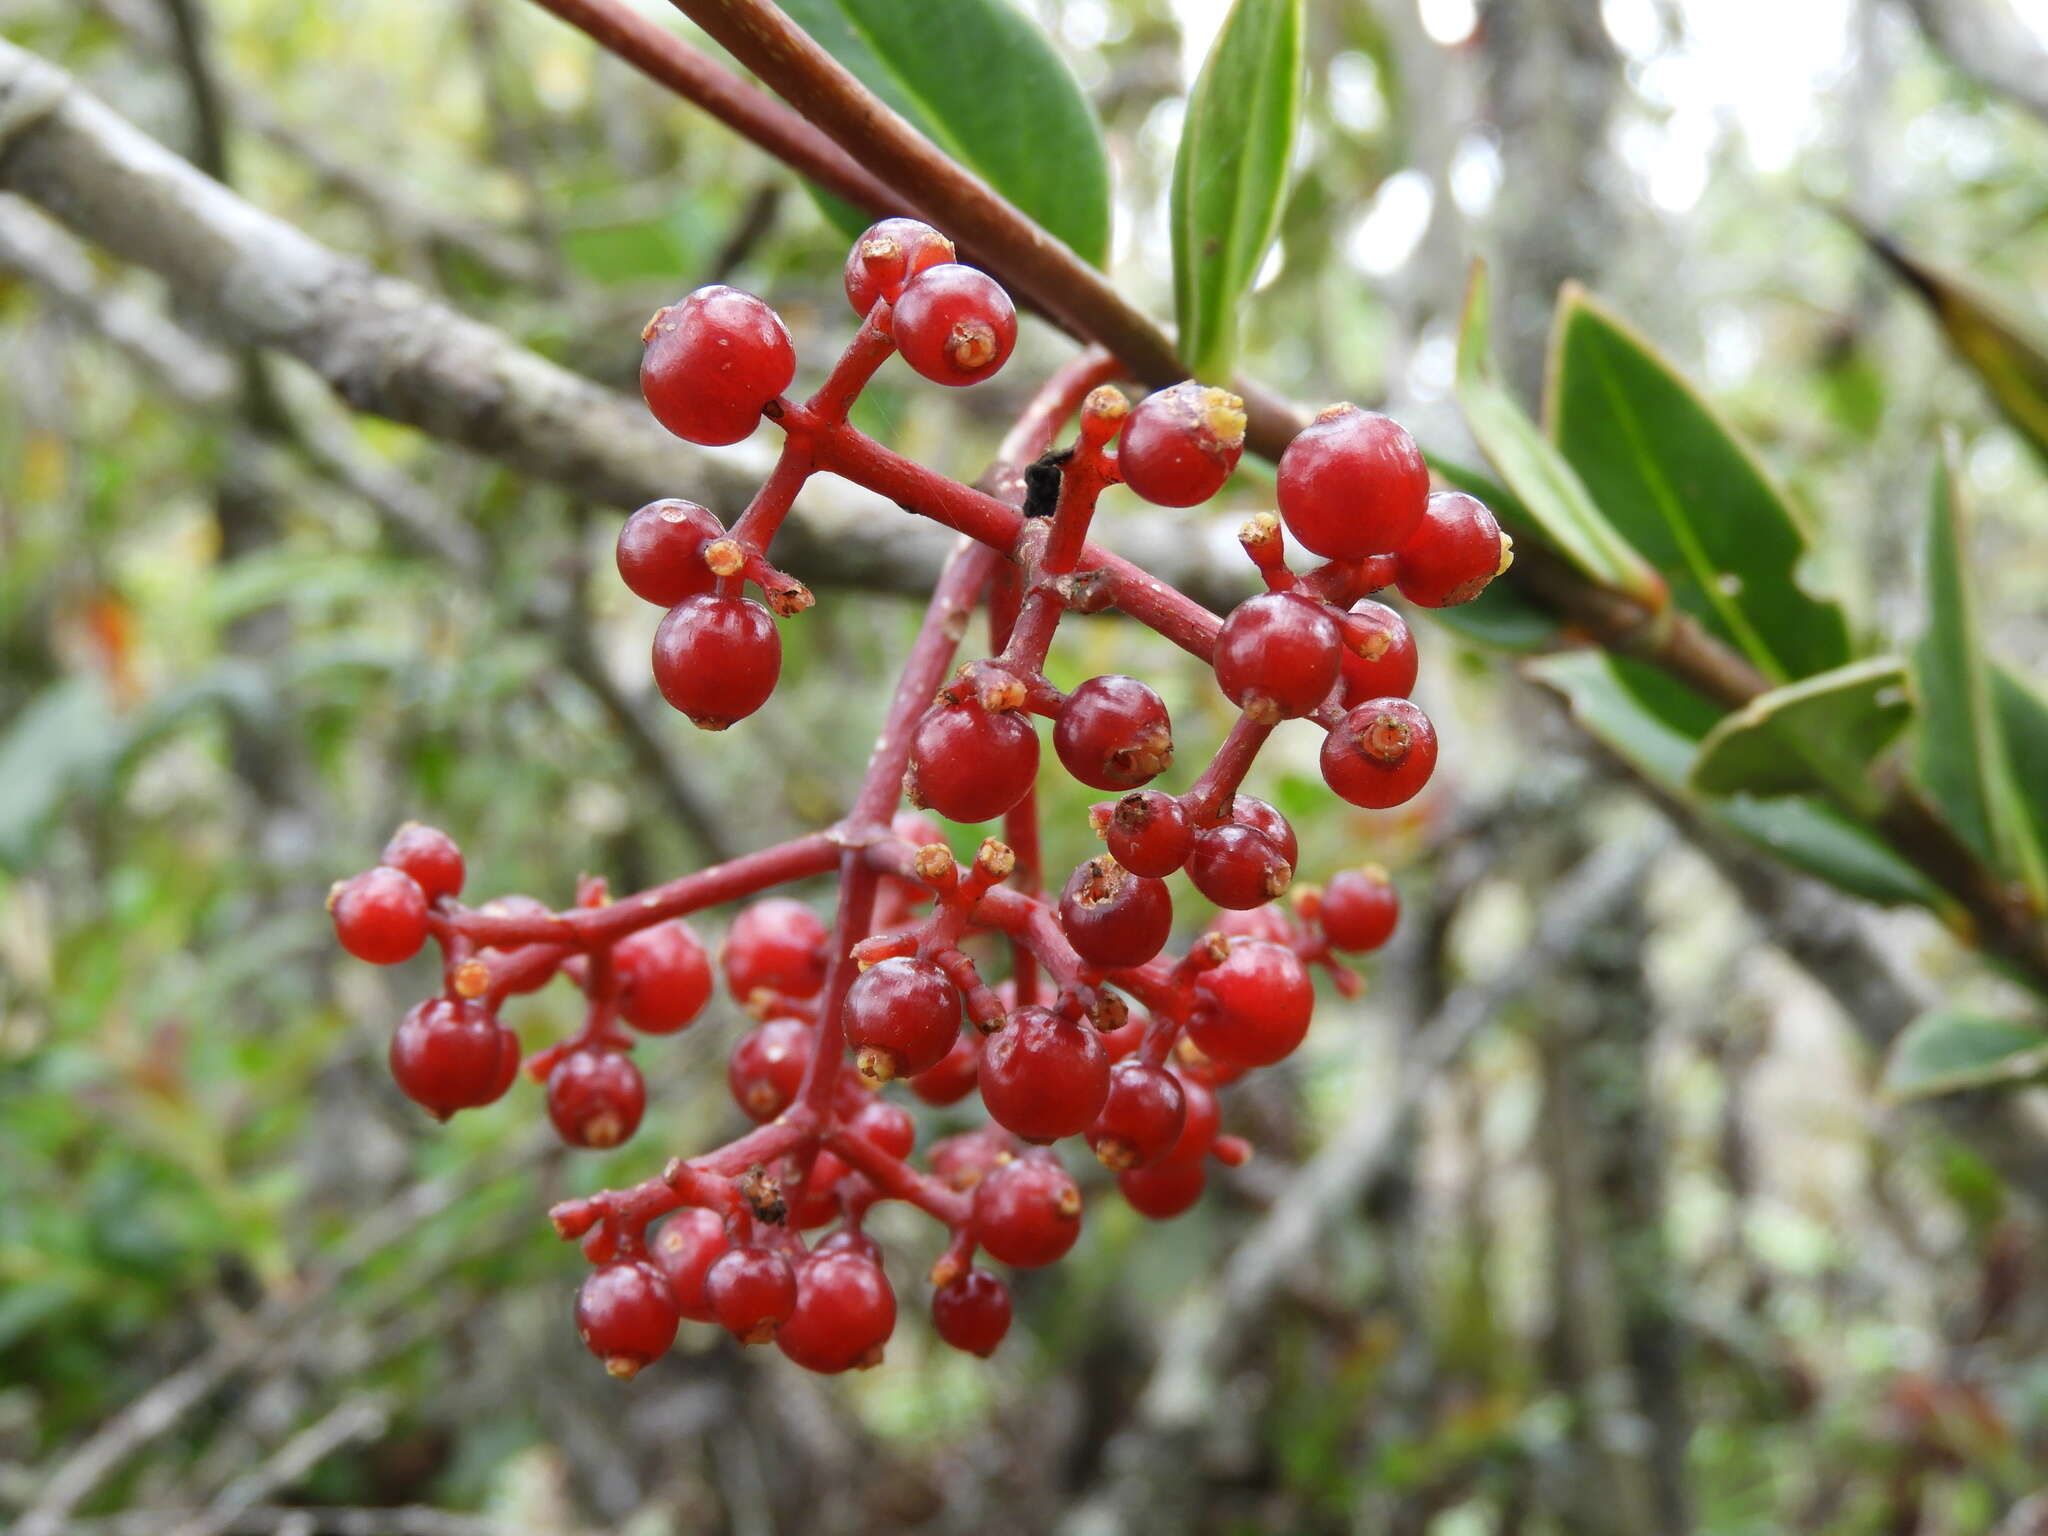 Image of Guadalupe wild coffee